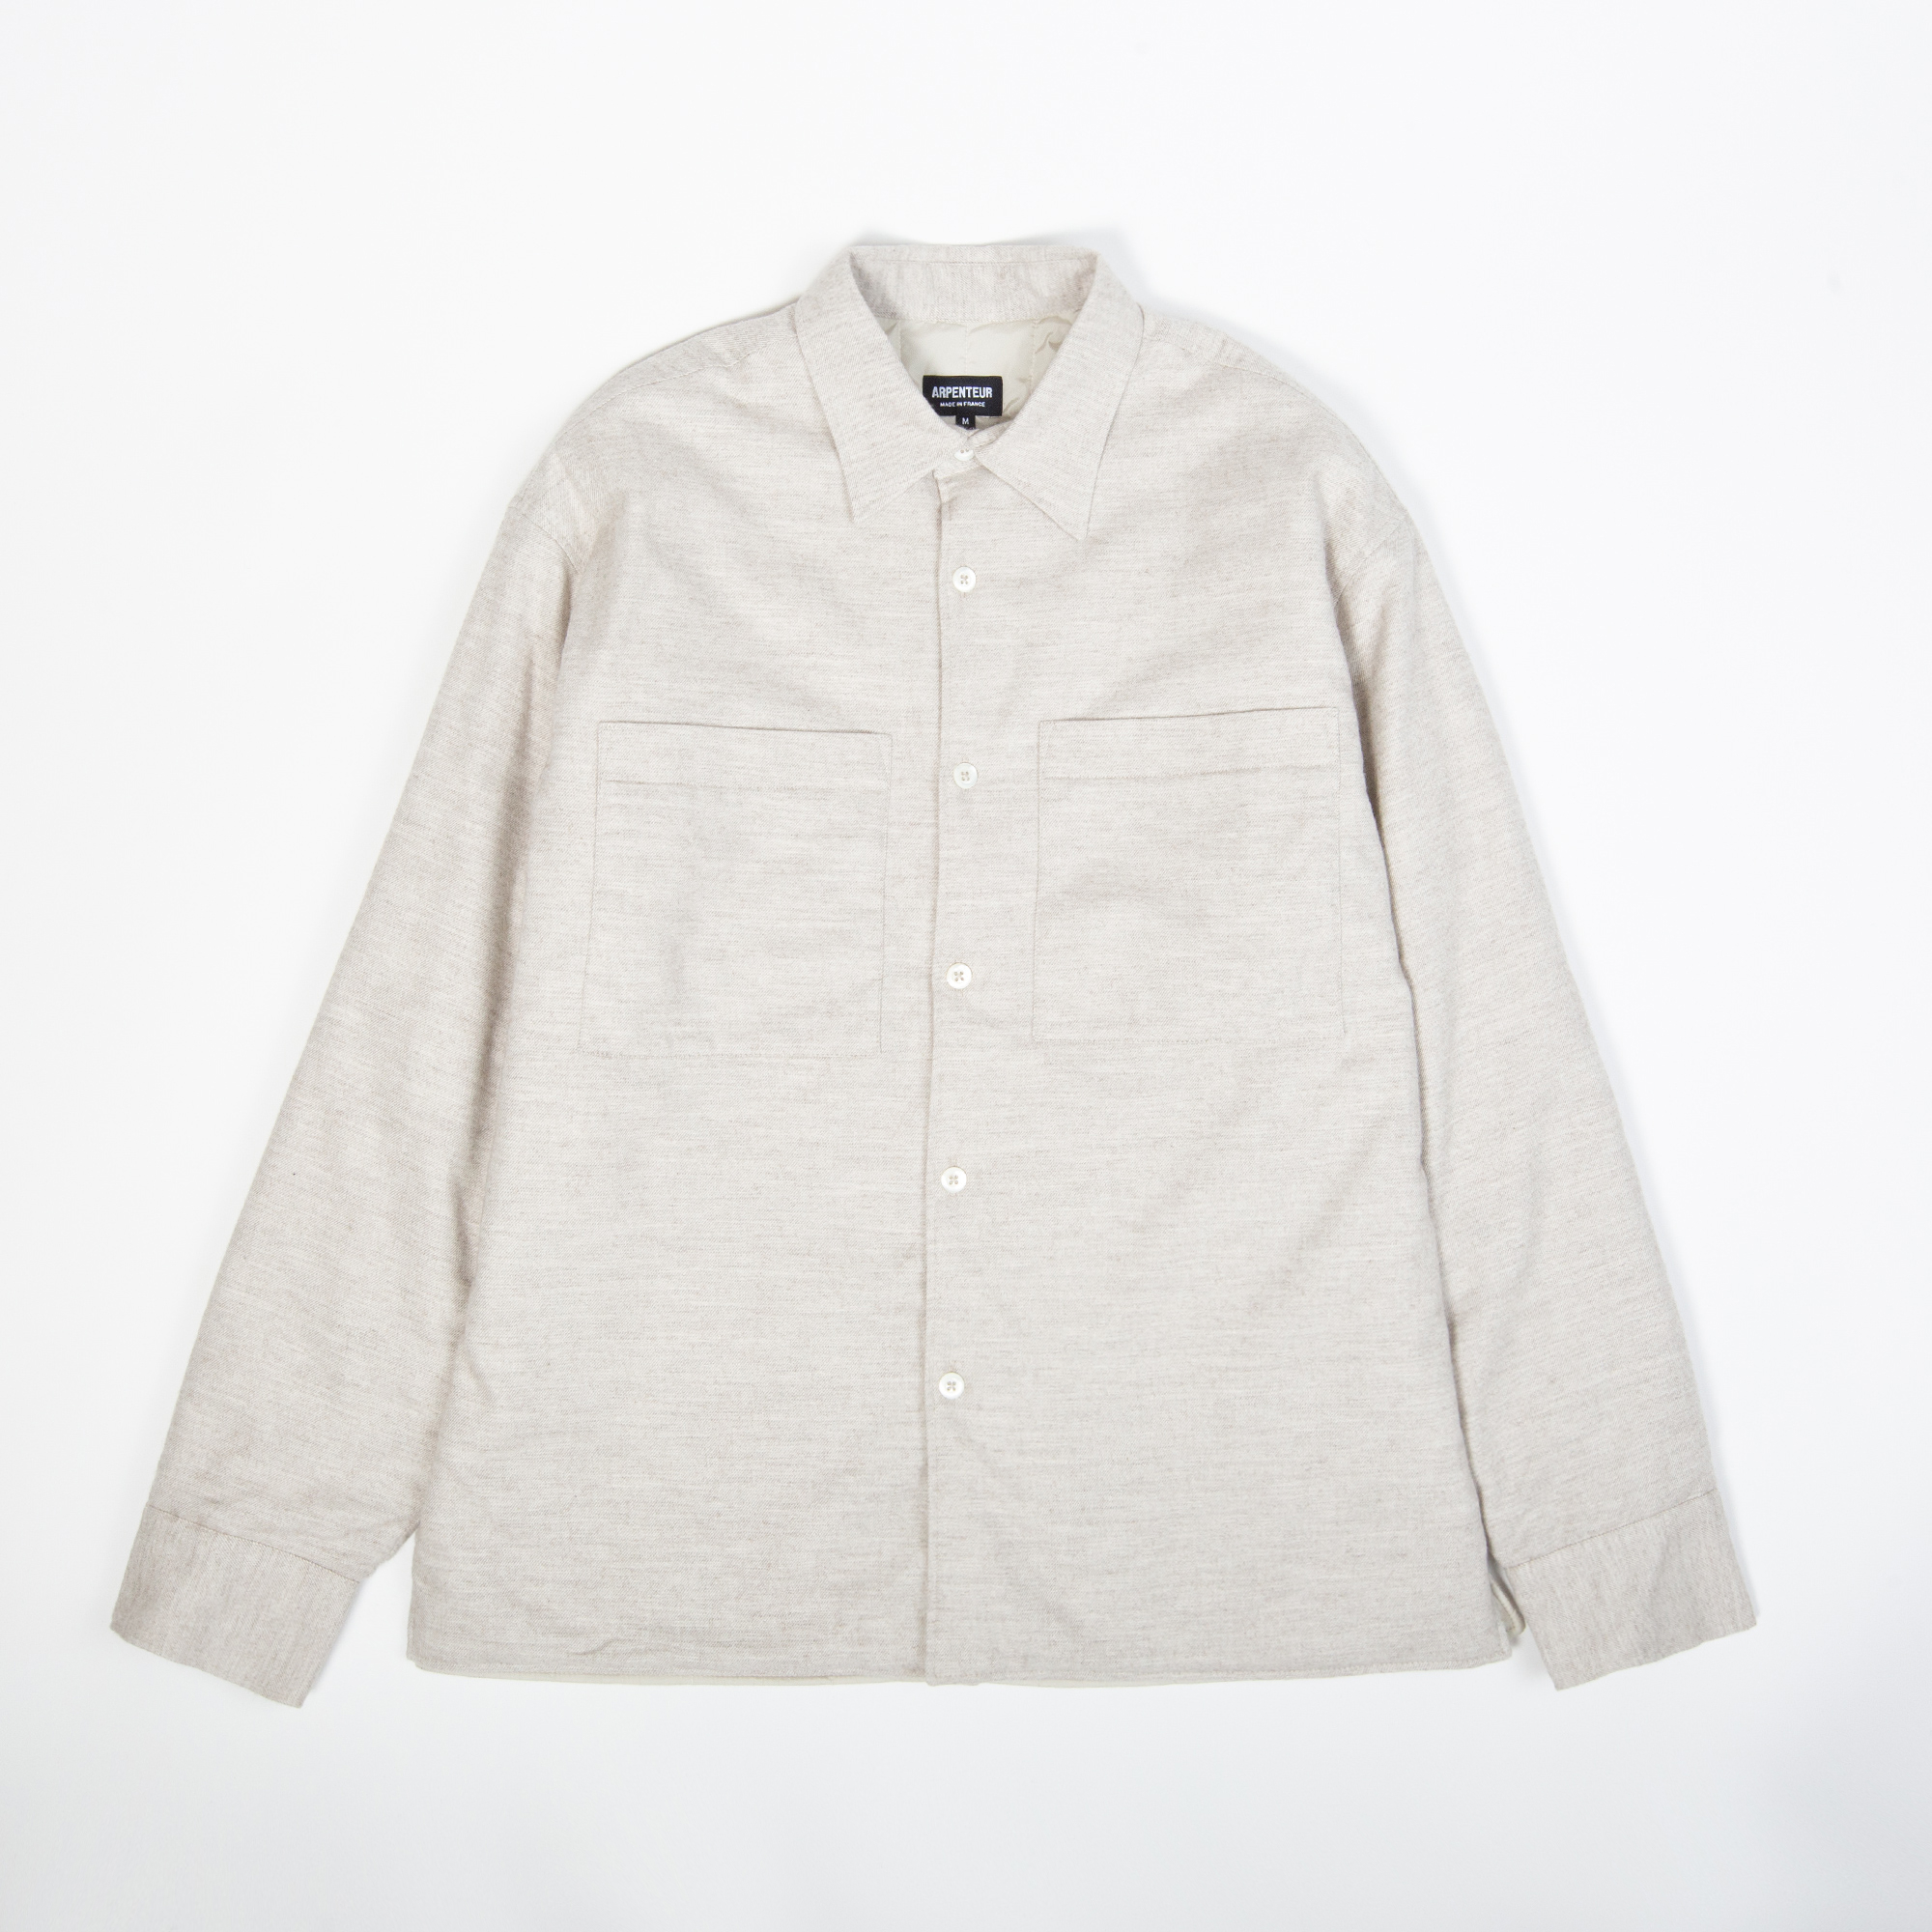 TWIN shirt in Natural color by Arpenteur